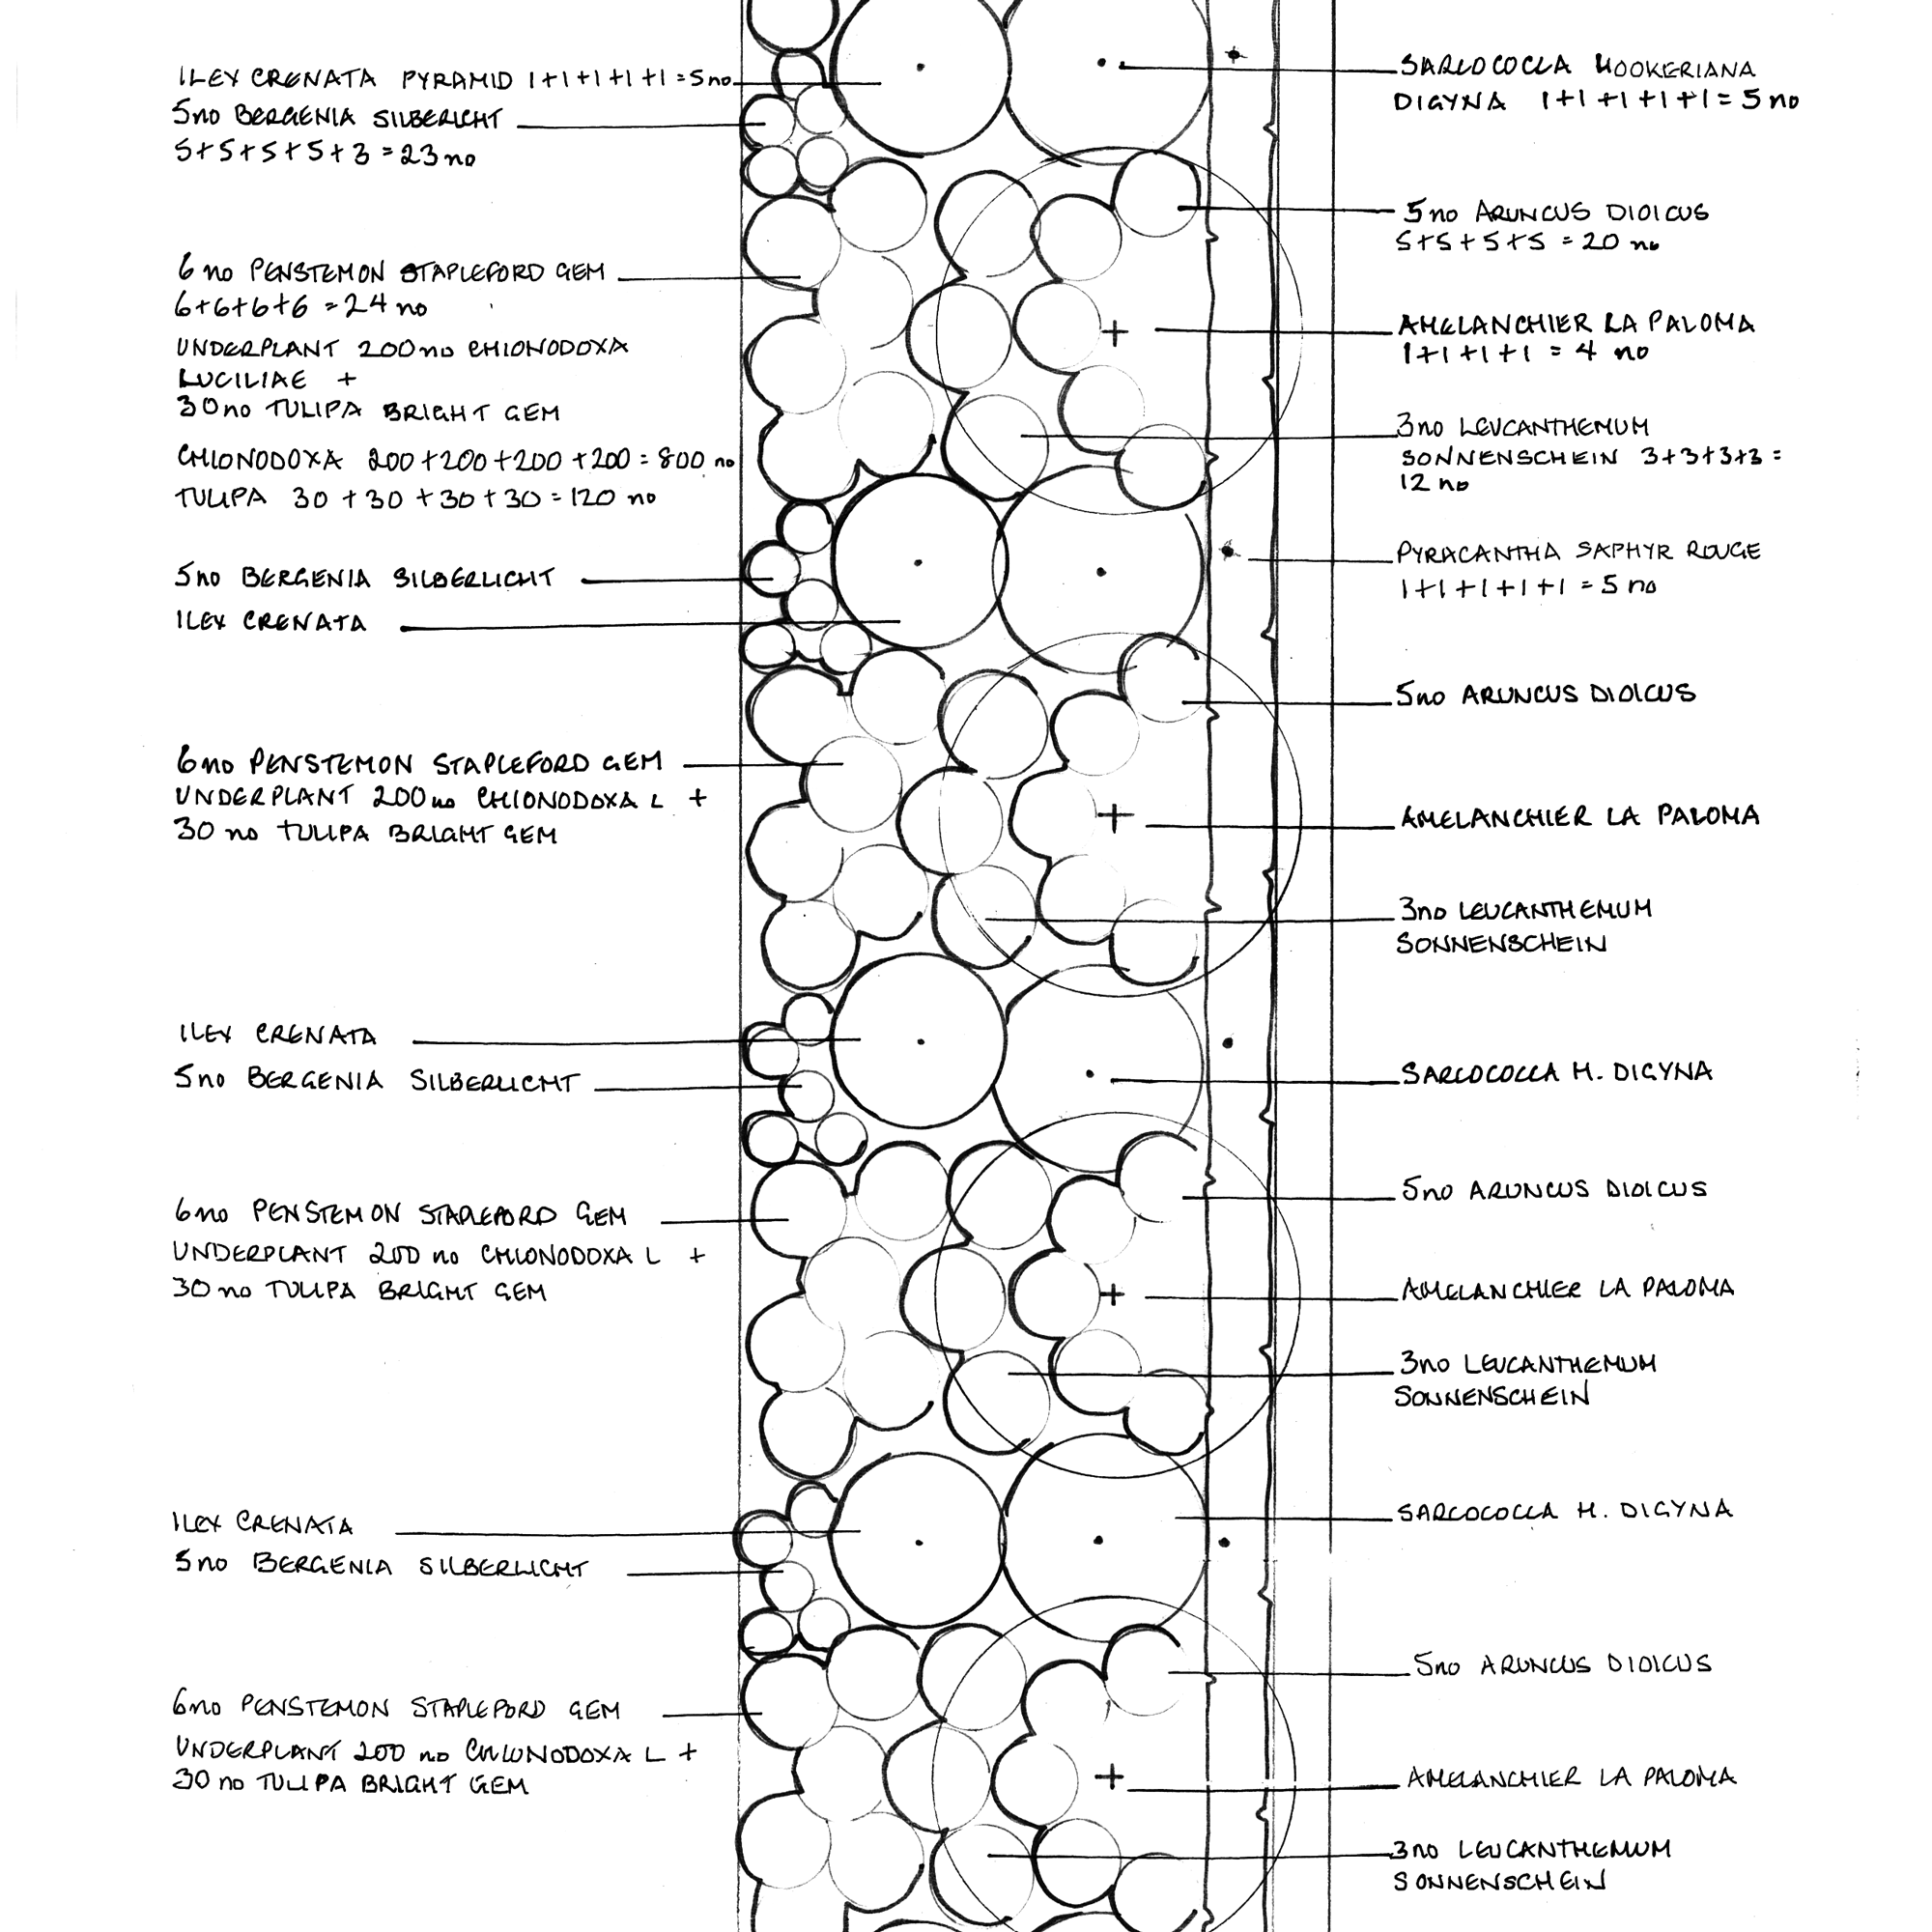 Example planting plan produced for postal and email garden design service